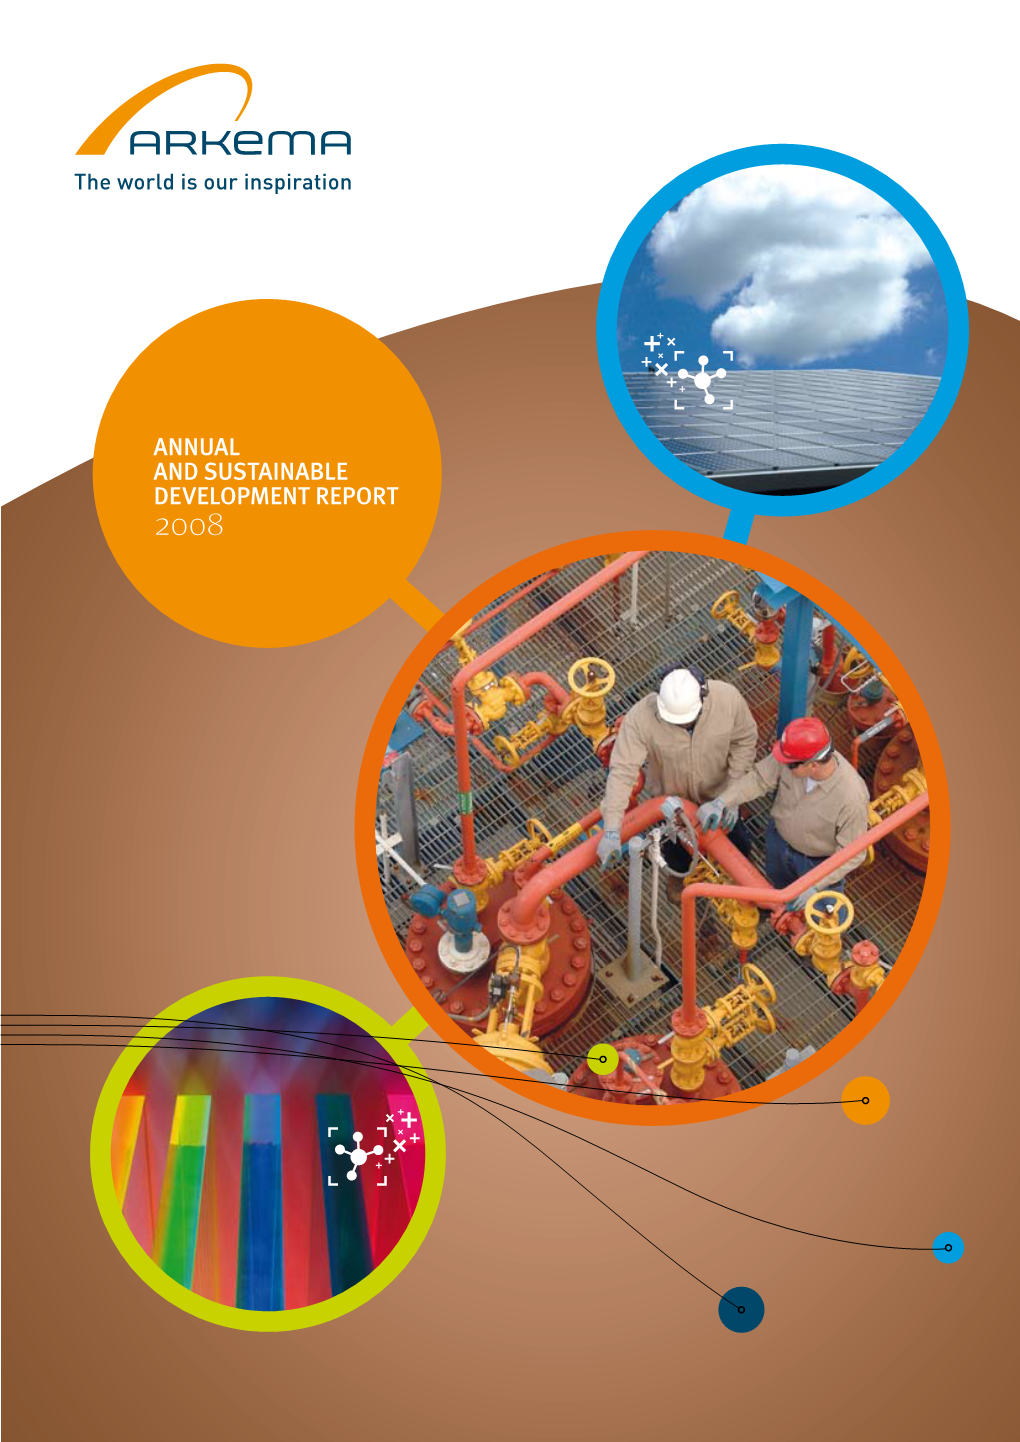 2008 Annual and Sustainable Development Report